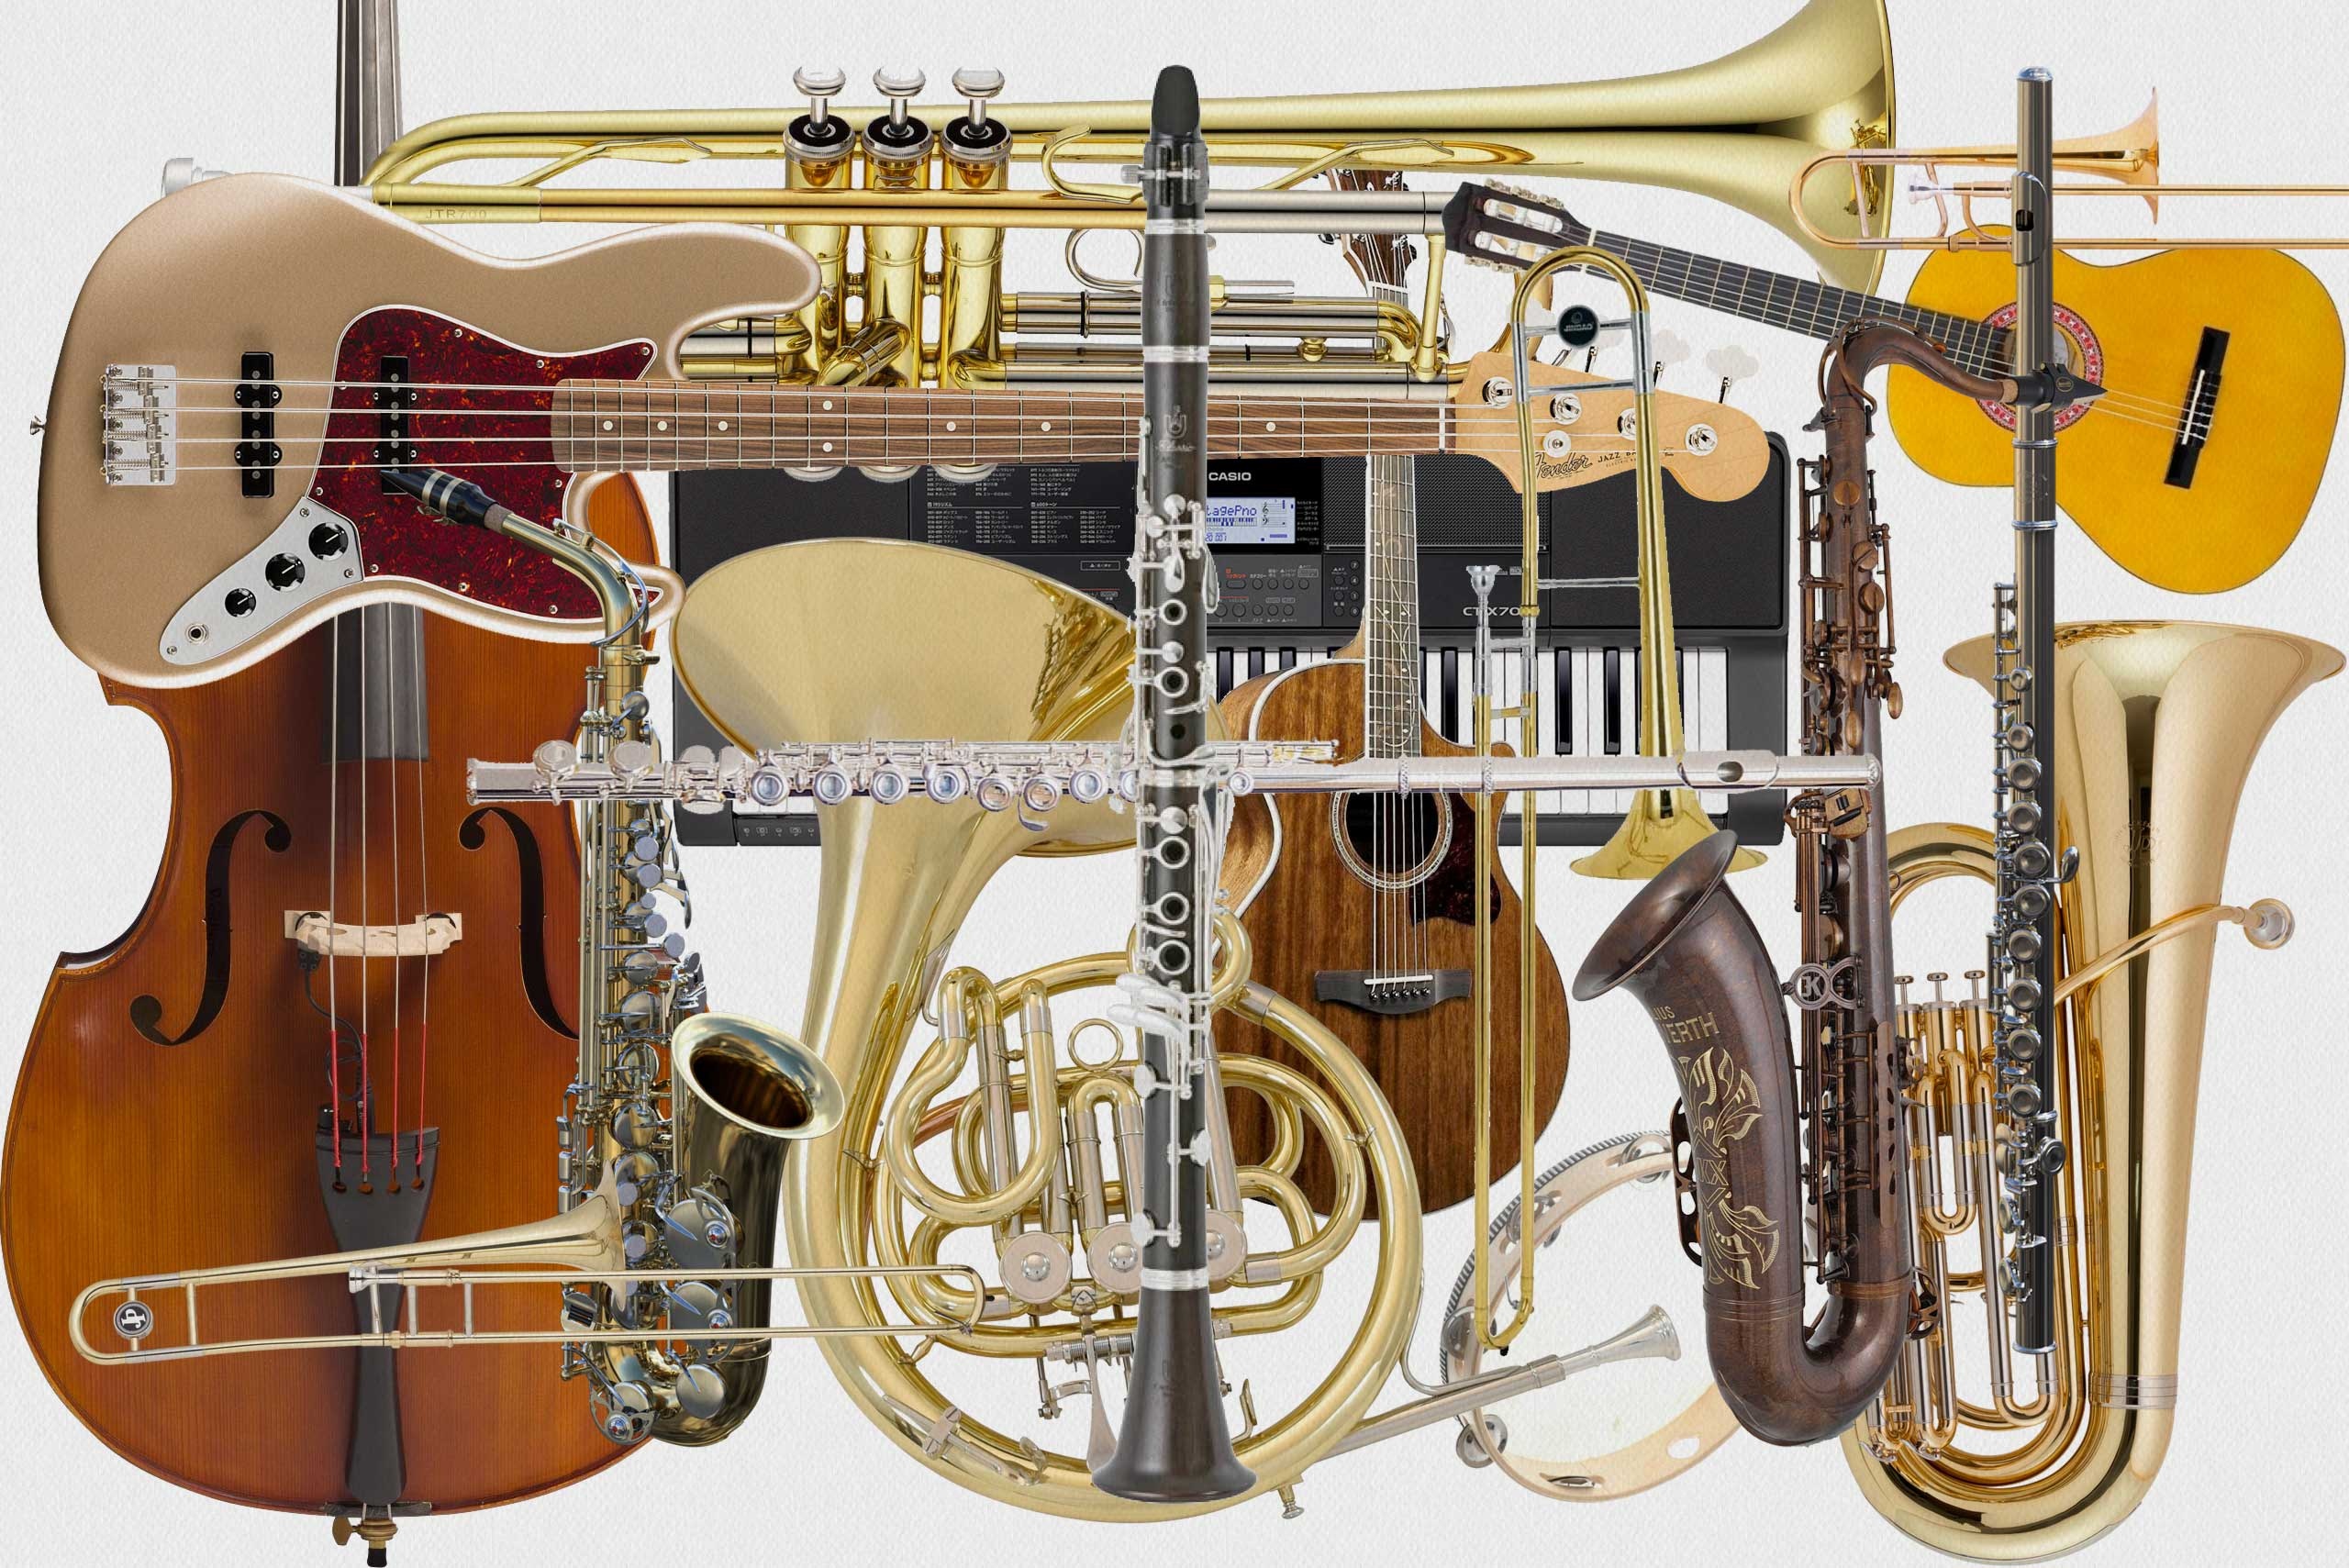 Musical Instruments: The devices created to make musical sounds, Musical range: Soprano, Alto, Tenor, Baritone, Bass. 2560x1710 HD Wallpaper.